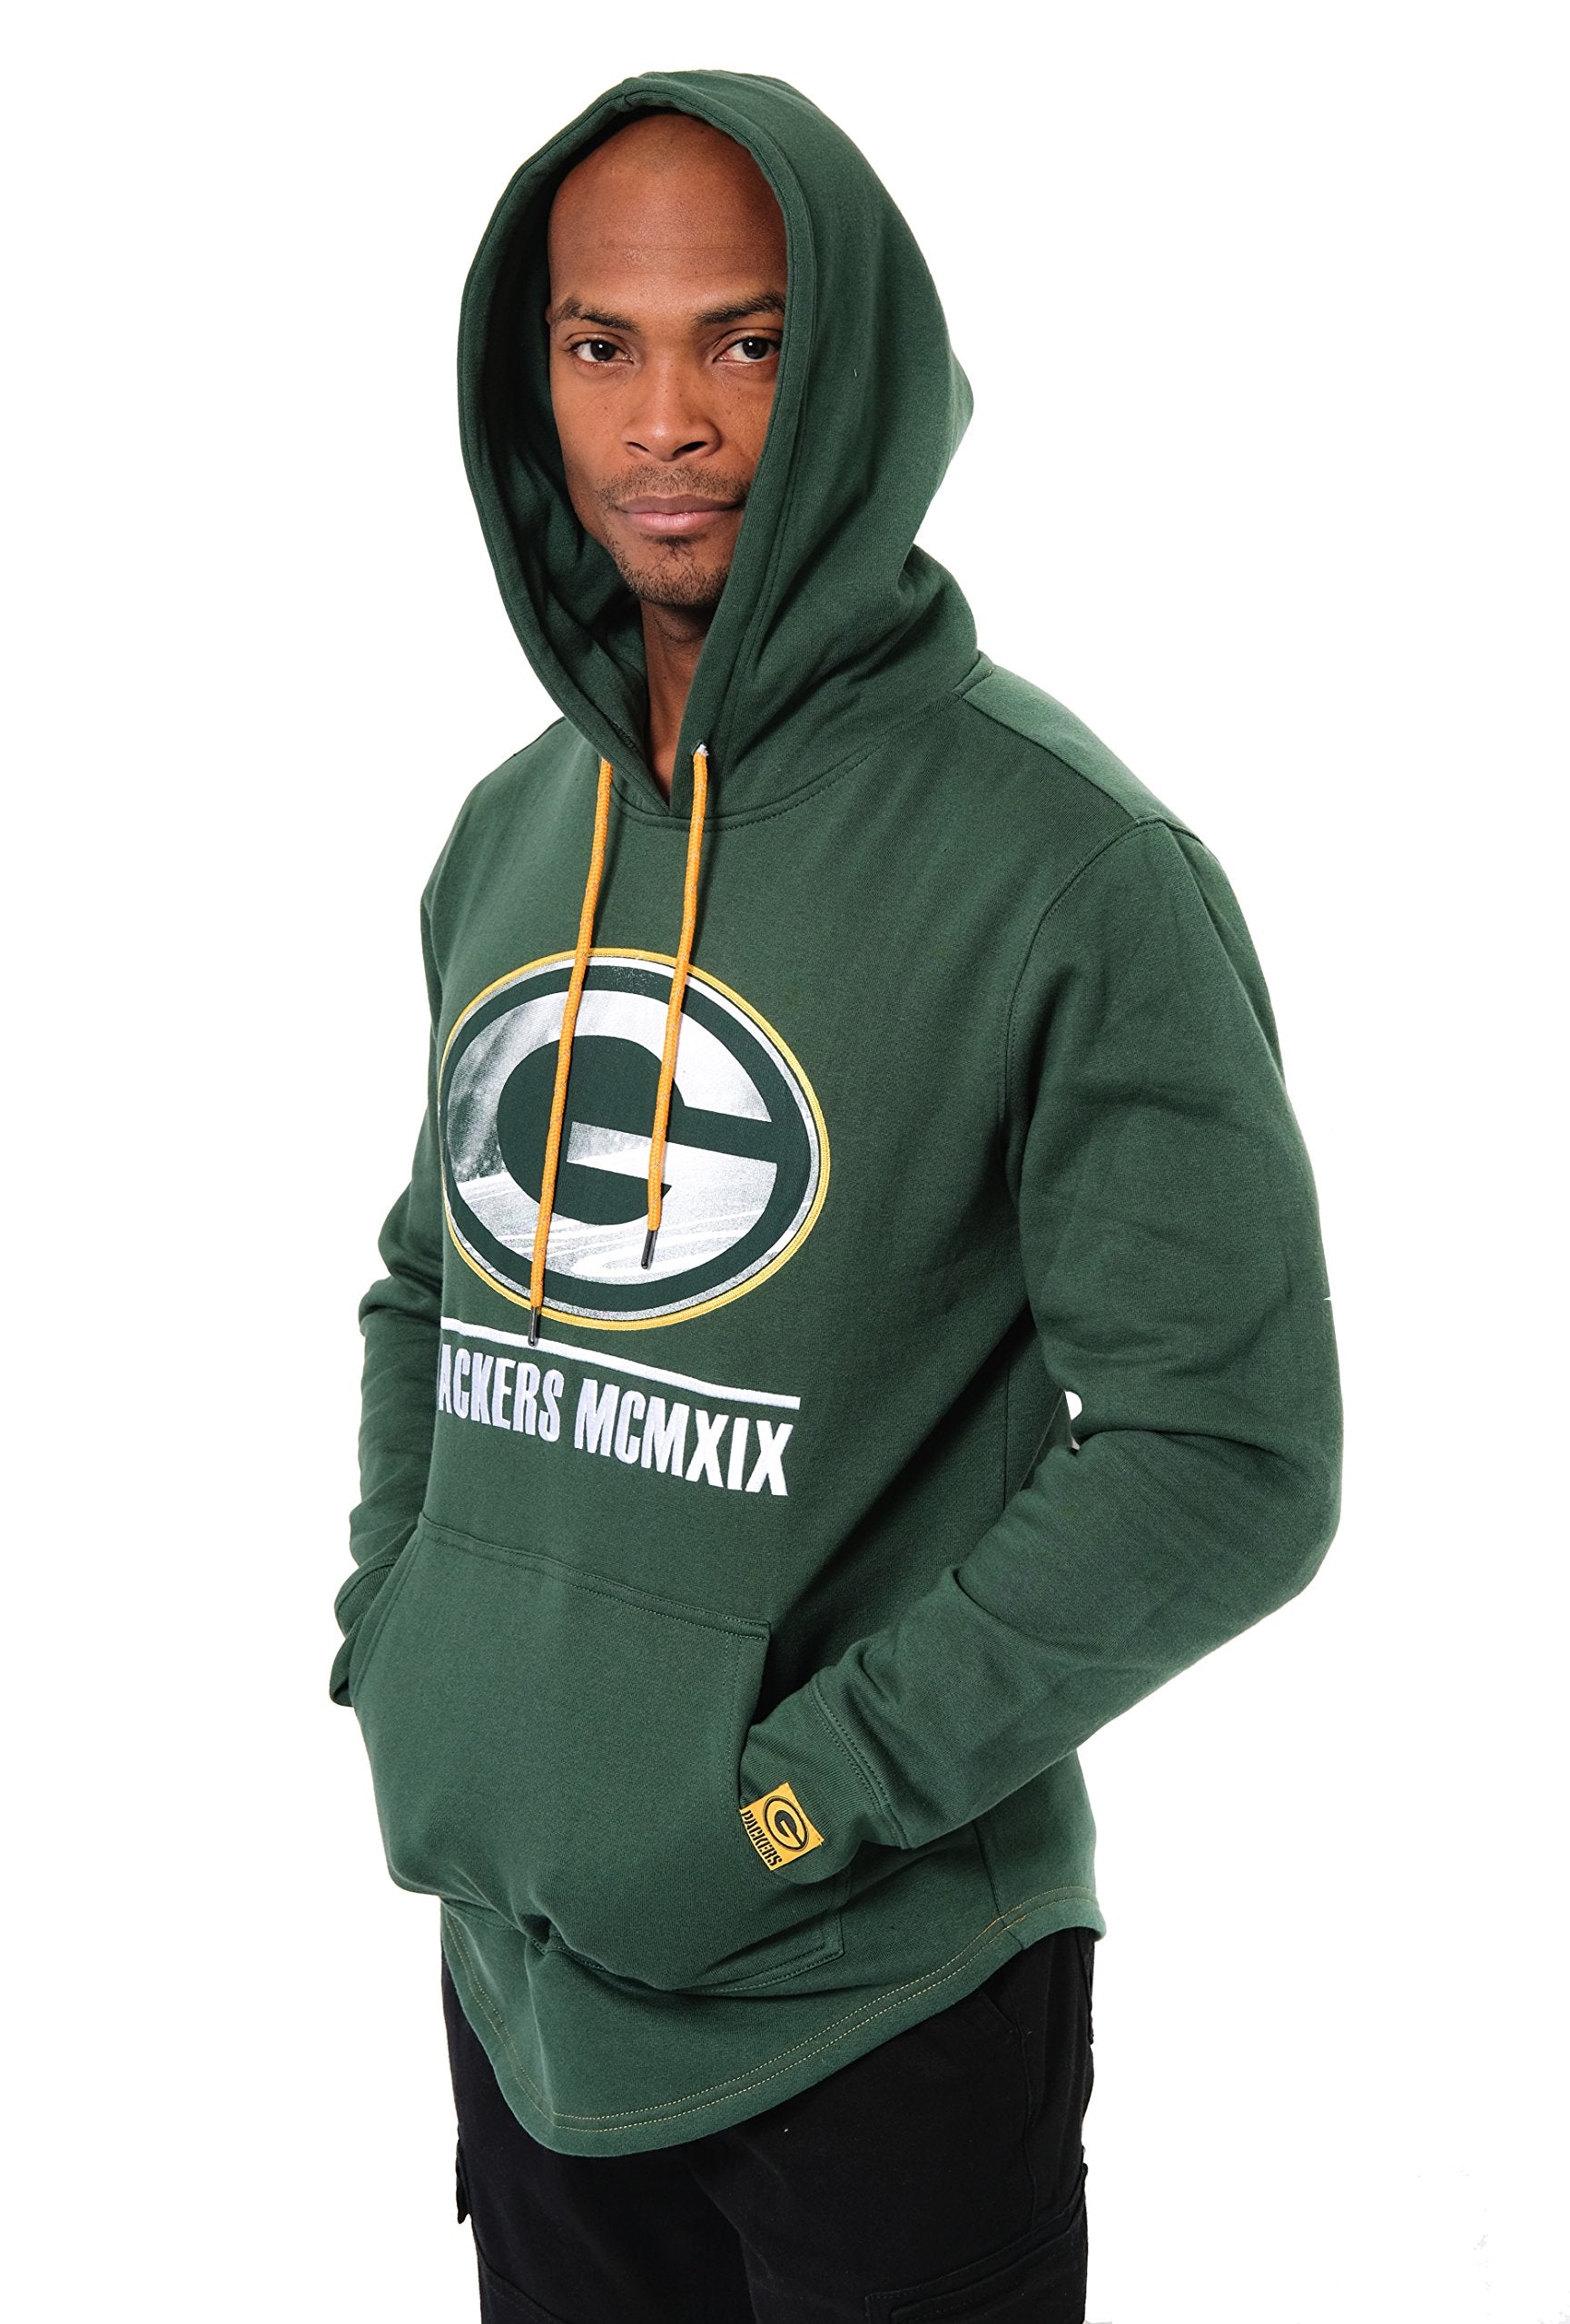 Ultra Game NFL Green Bay Packers Mens Embroidered Fleece Hoodie Pullover Sweatshirt|Green Bay Packers